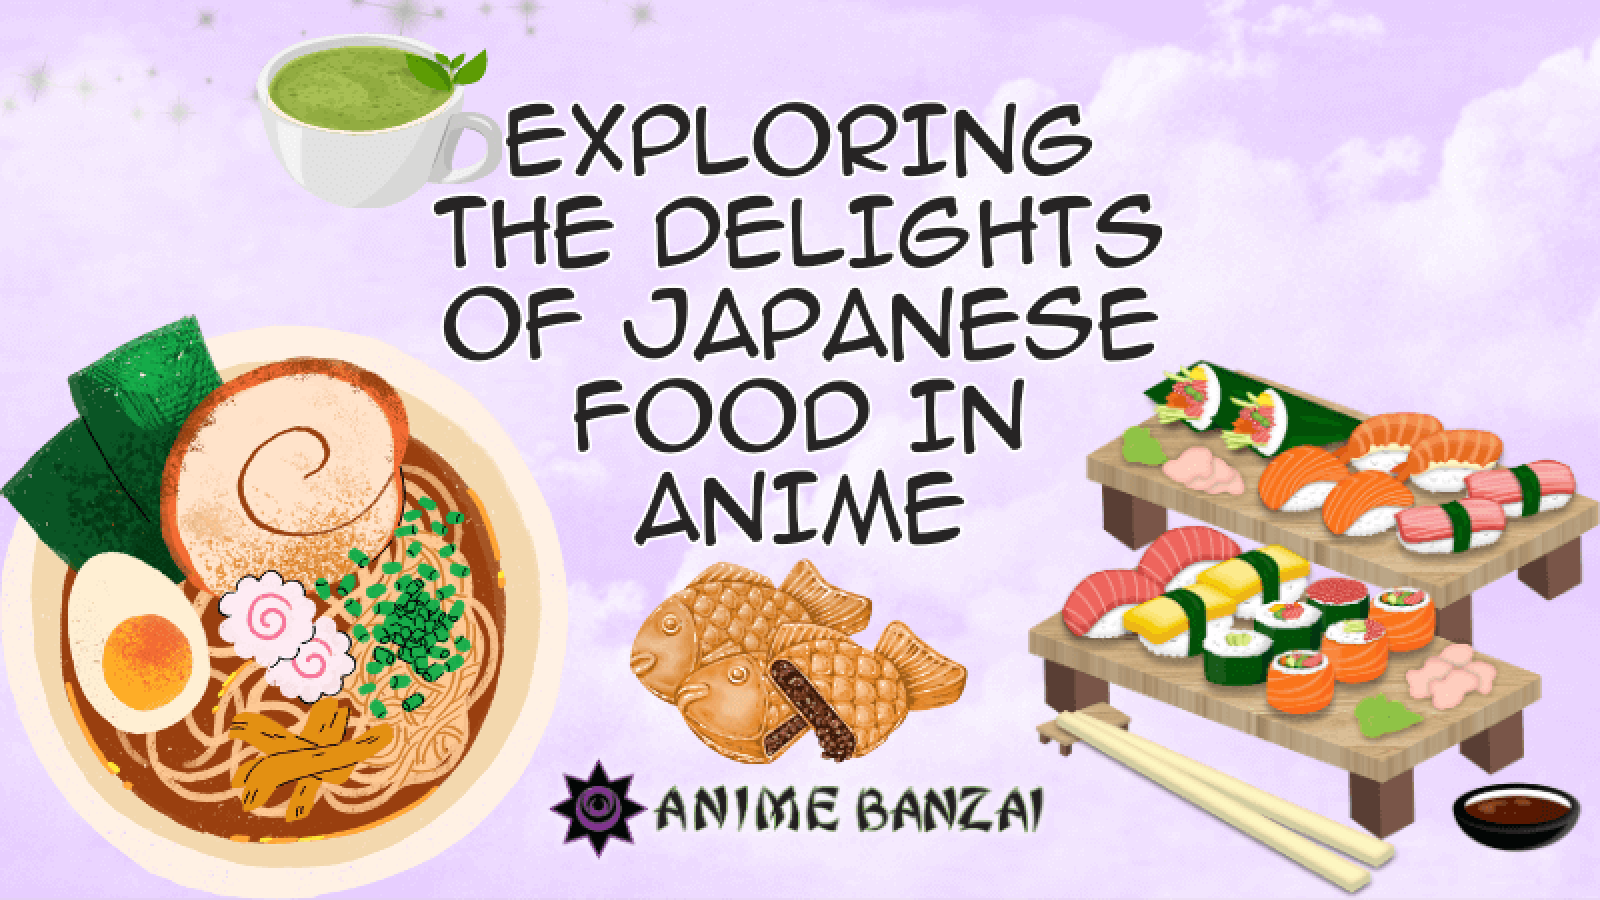 Japanese Food in Anime Blog Title Card